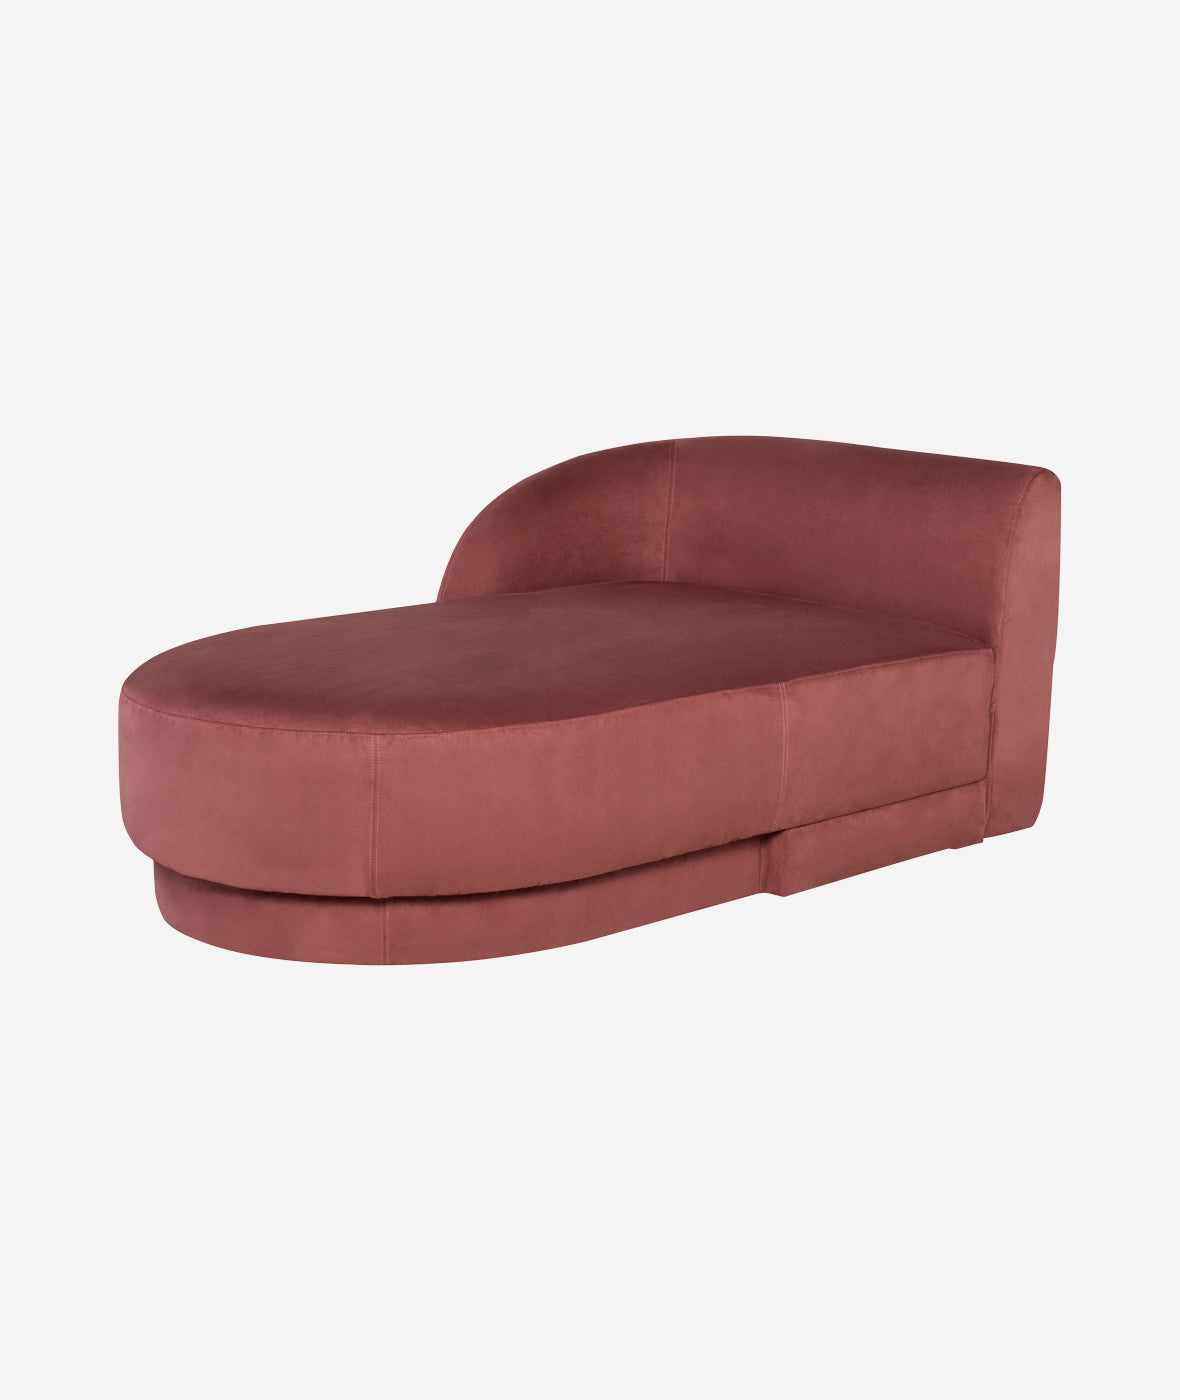 Seraphina Modular Chaise - More Options